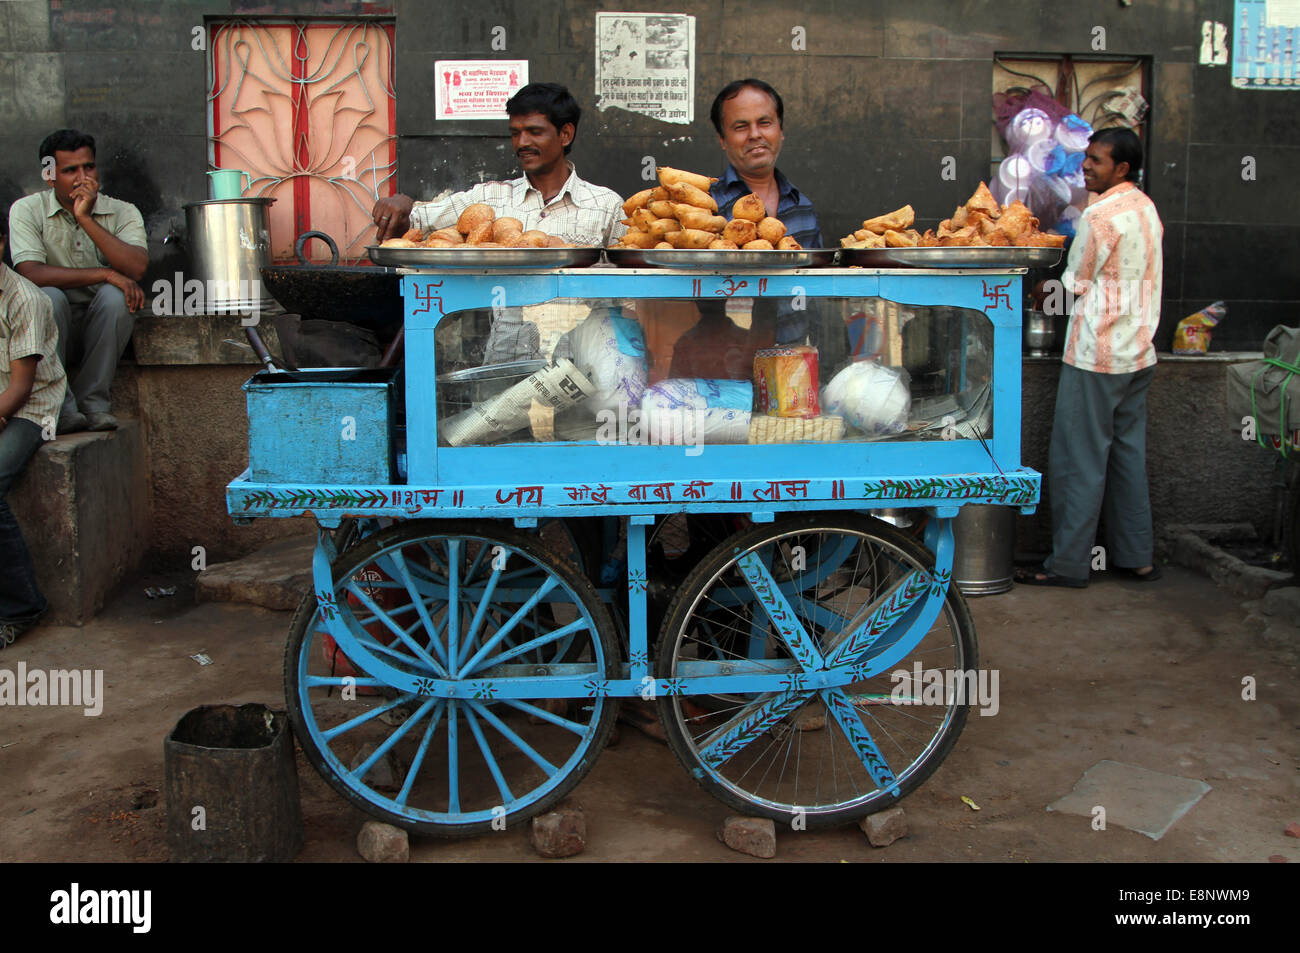 A food stall on Dargah Bazar in Ajmer, India Stock Photo